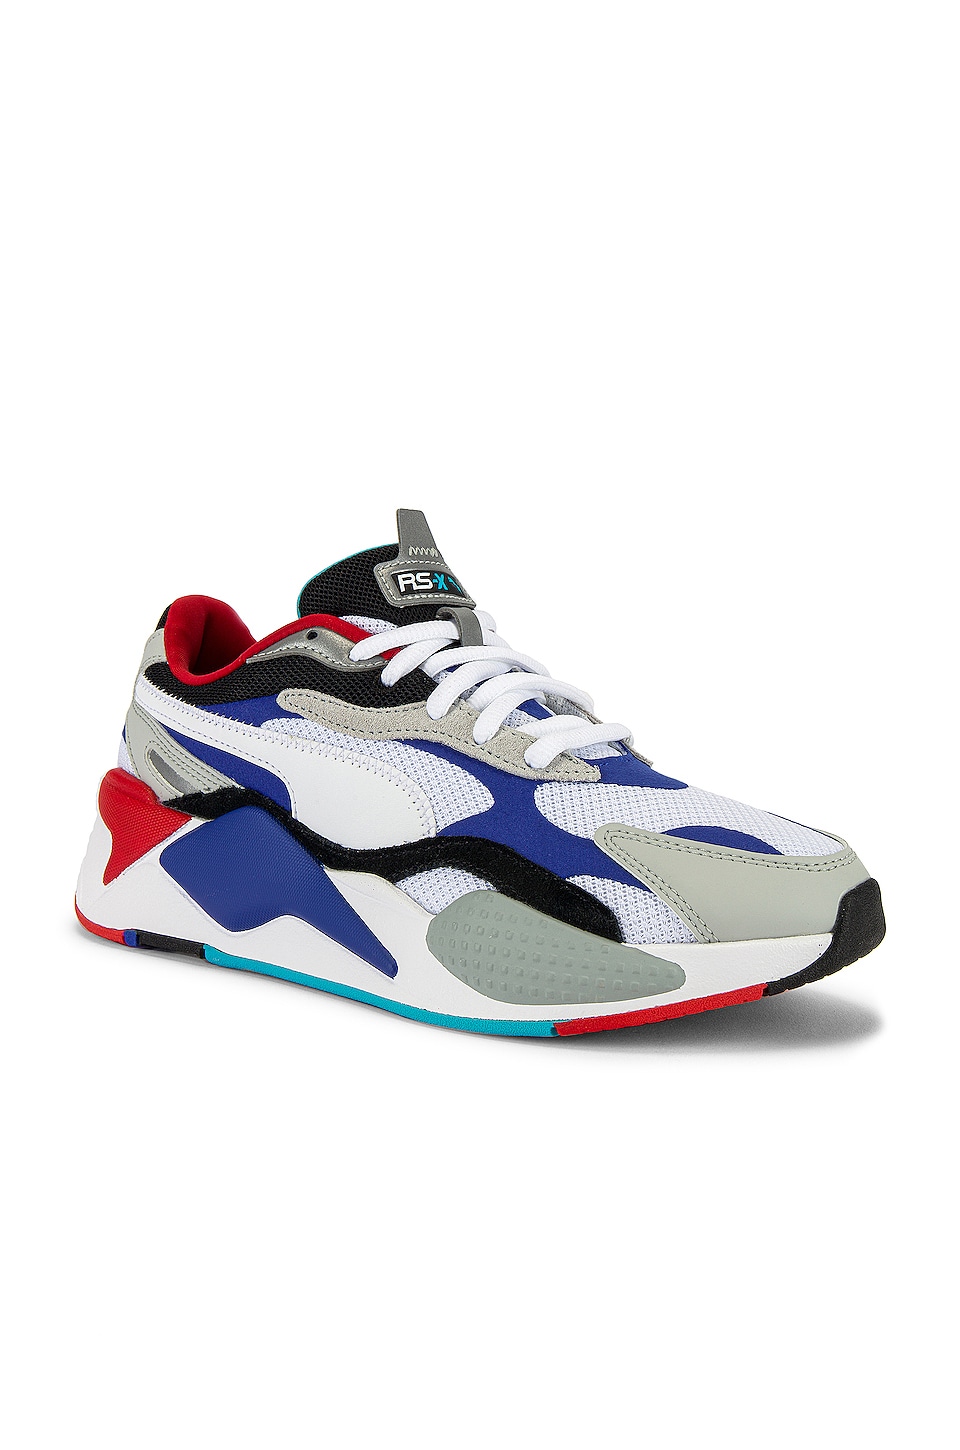 Puma Select RSX Cube RS-X3 Puzzle in 